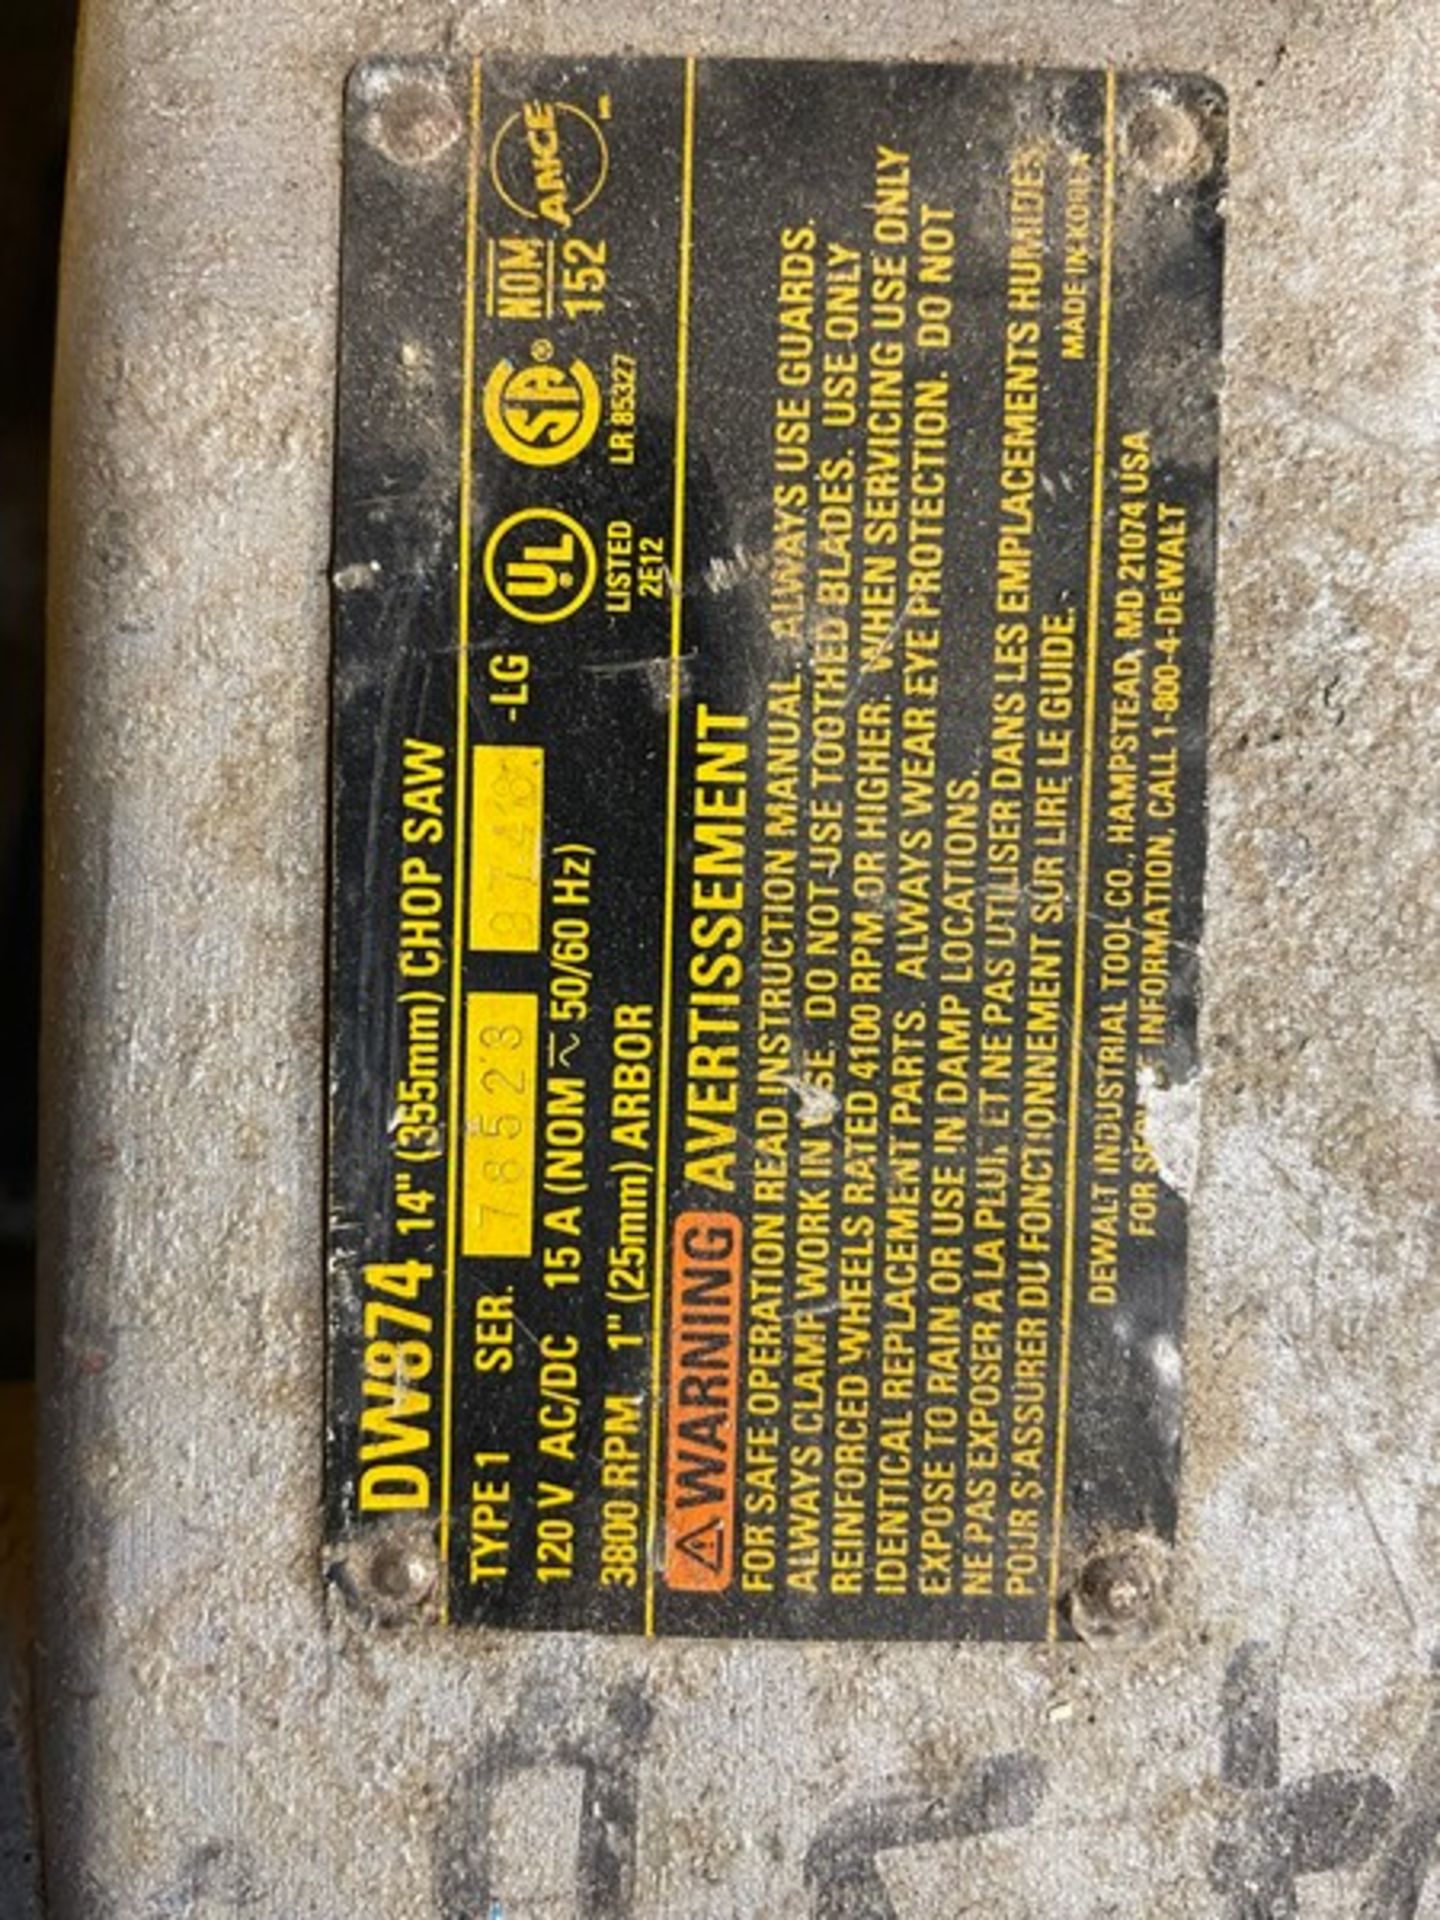 DeWalt 14” Abrasive Chop Saw, S/N 78523, 120 Volts (NOTE: No Blade) (LOCATED IN MONROEVILLE, PA)( - Image 4 of 5